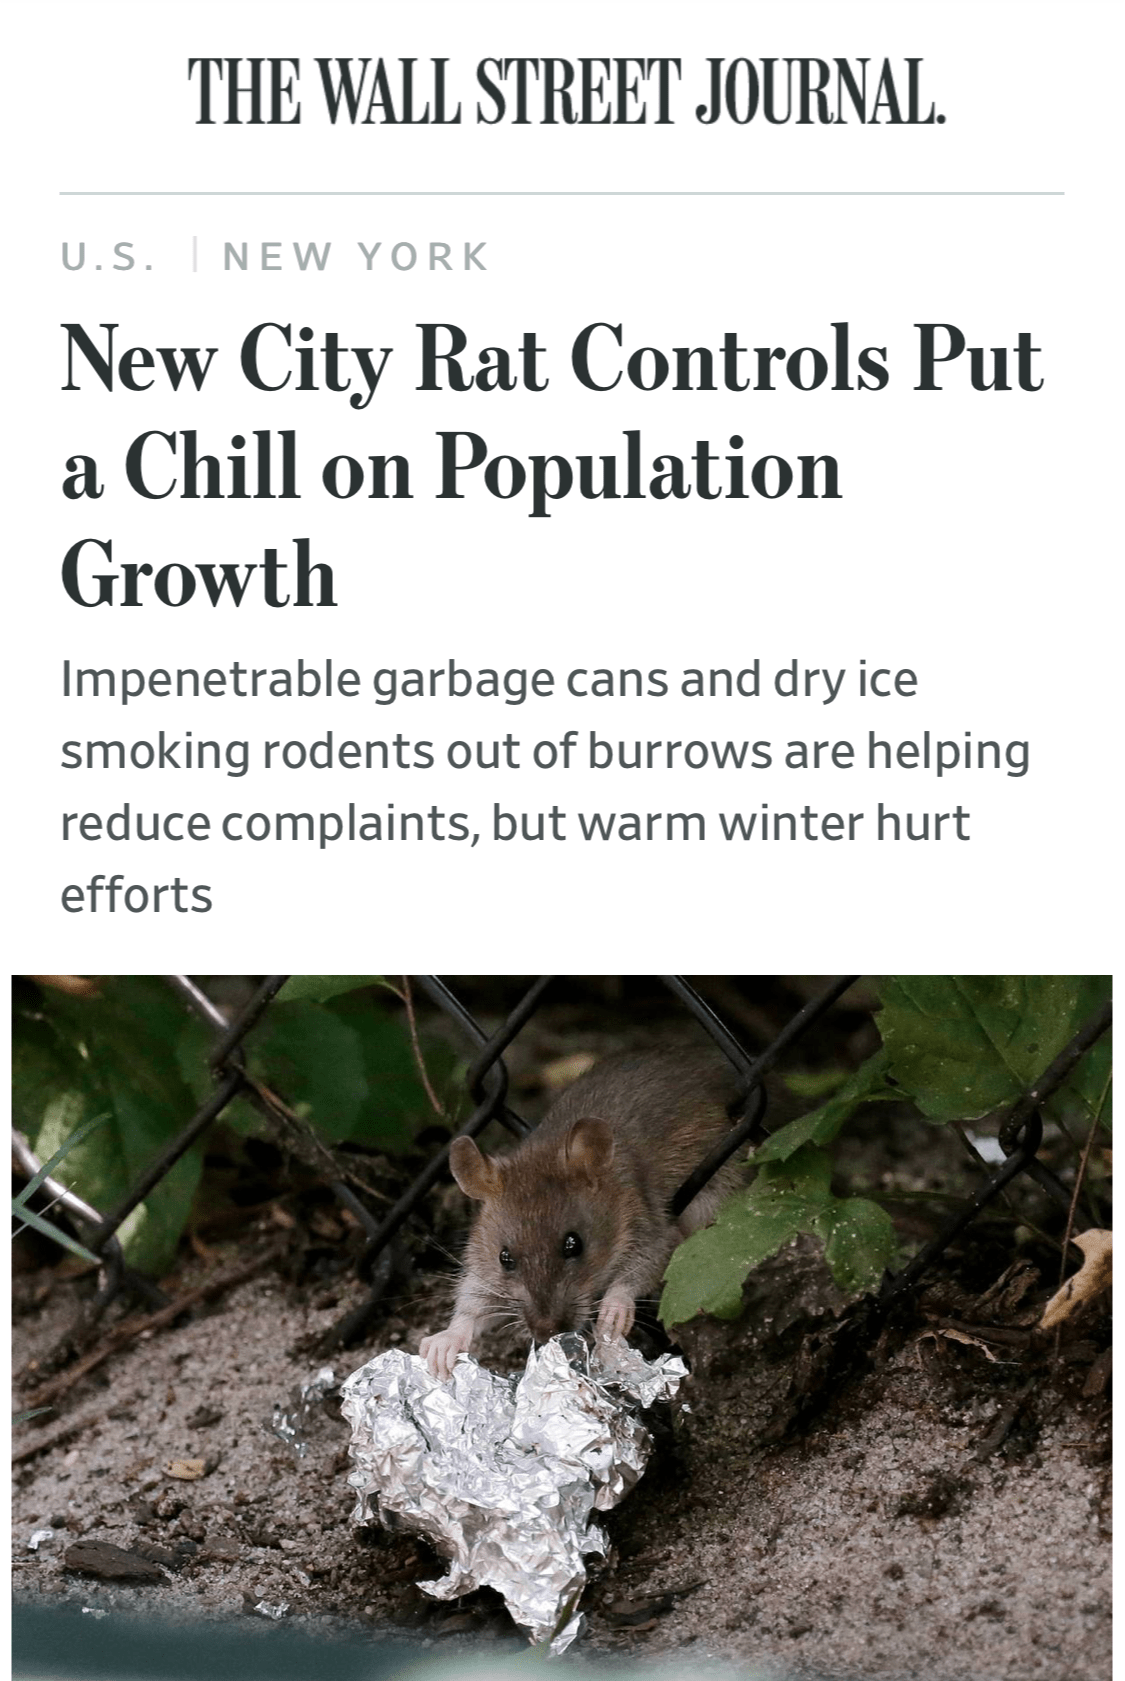 Wall Street Journal - New City Rat Controls Put a Chill on Population Growth